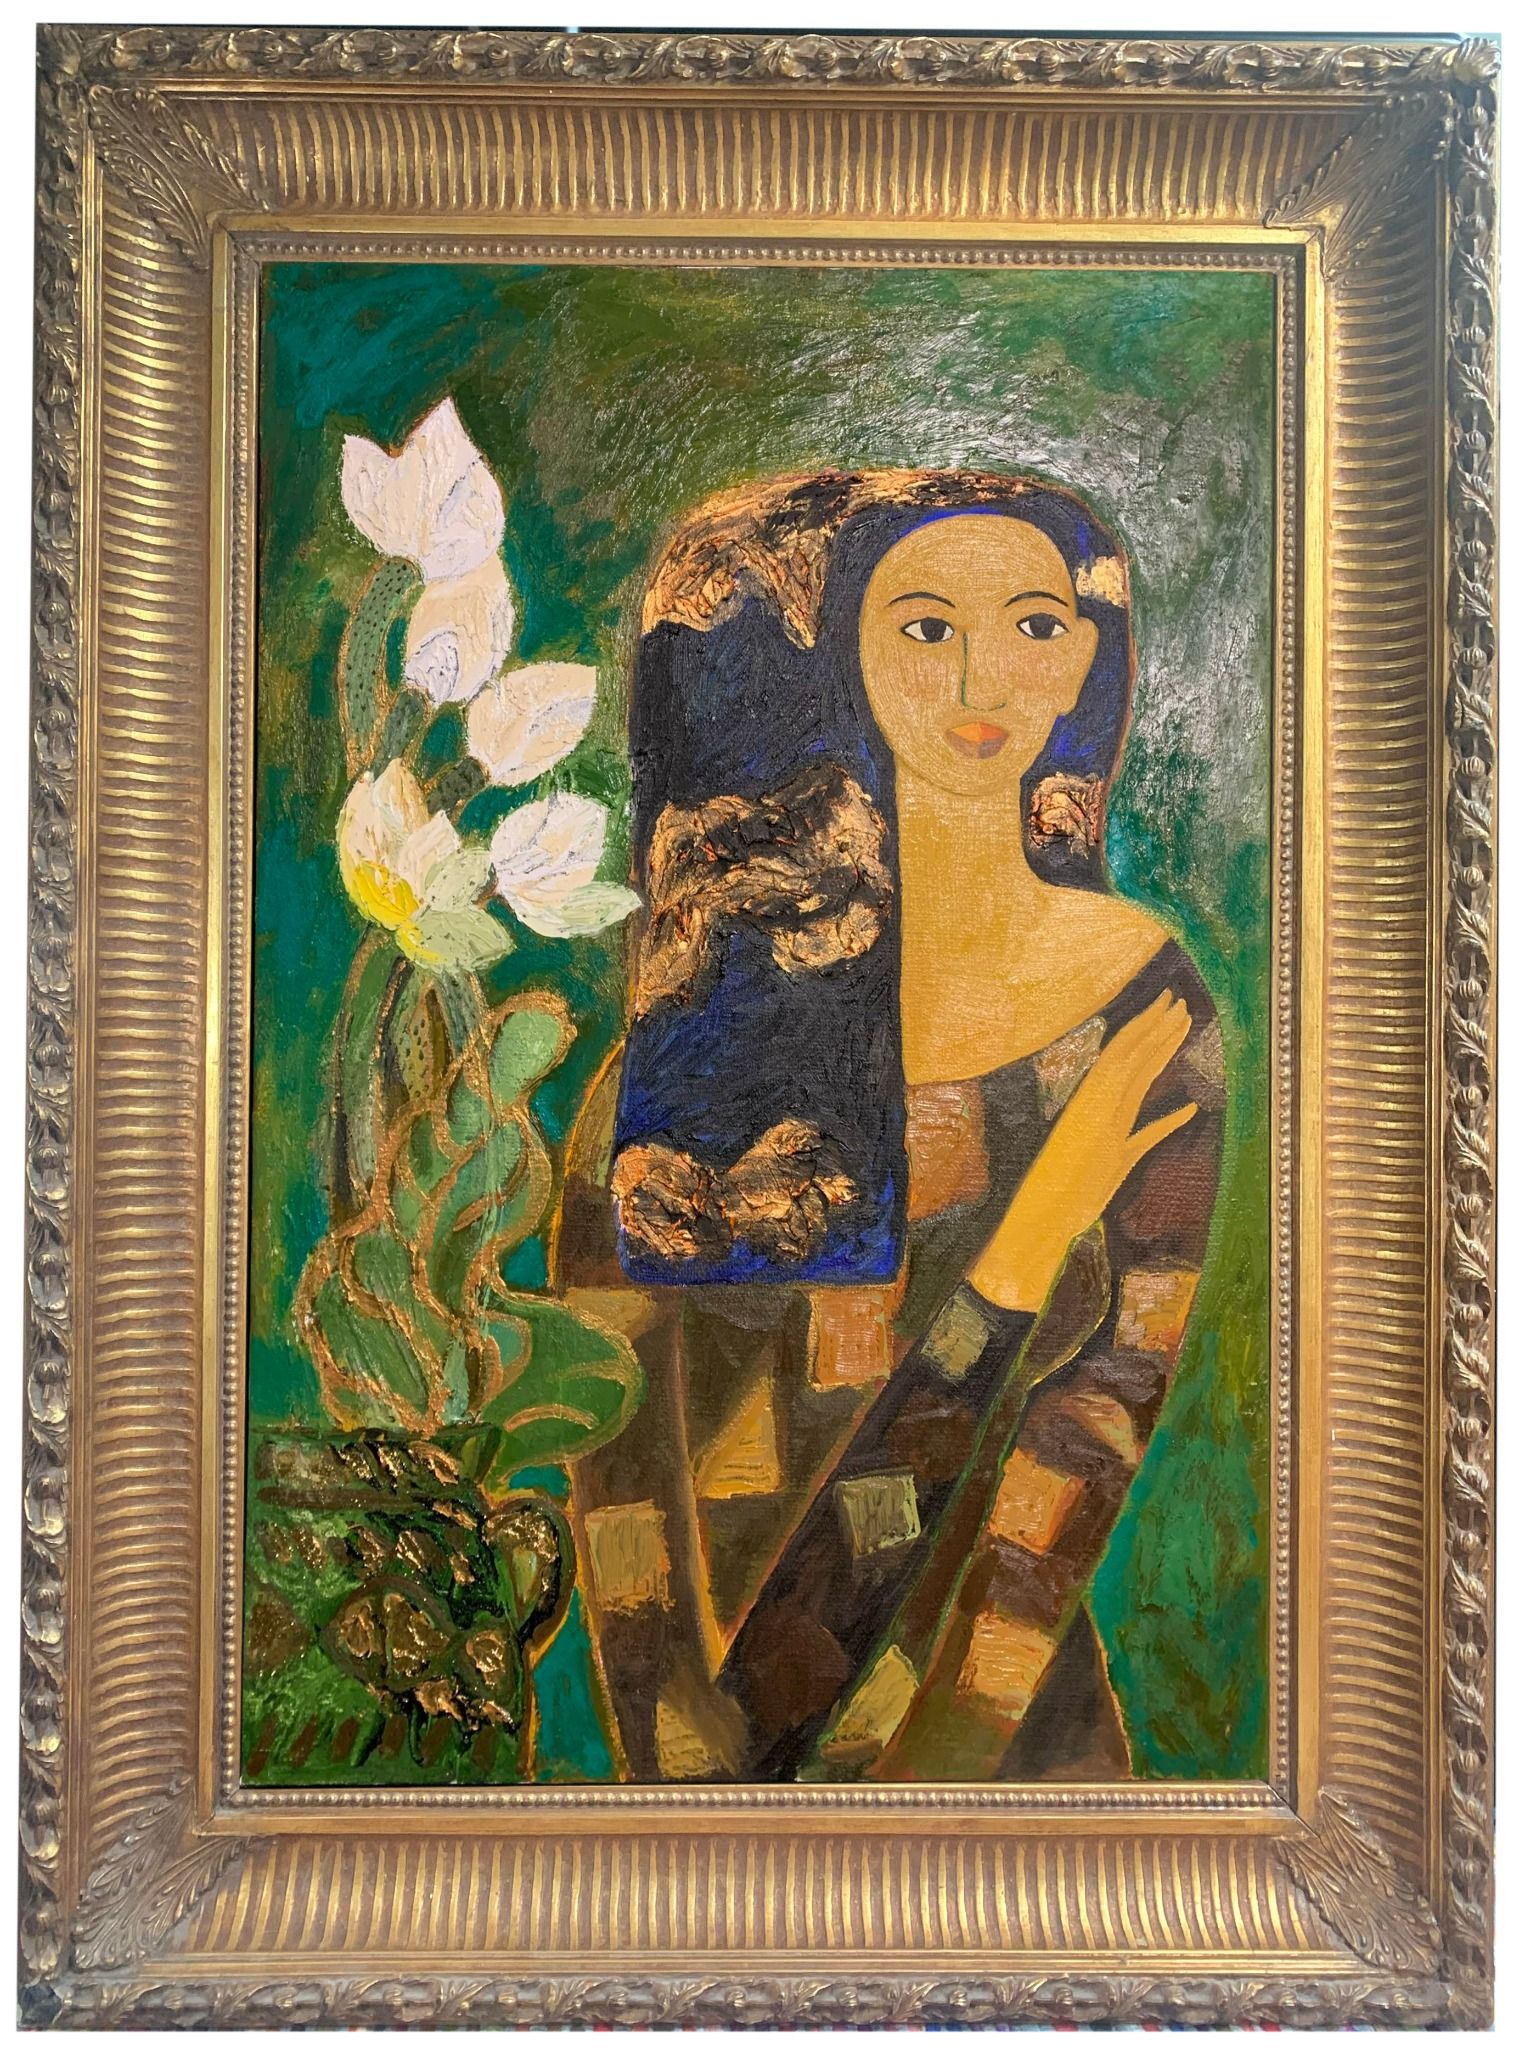  The girl with lotus 